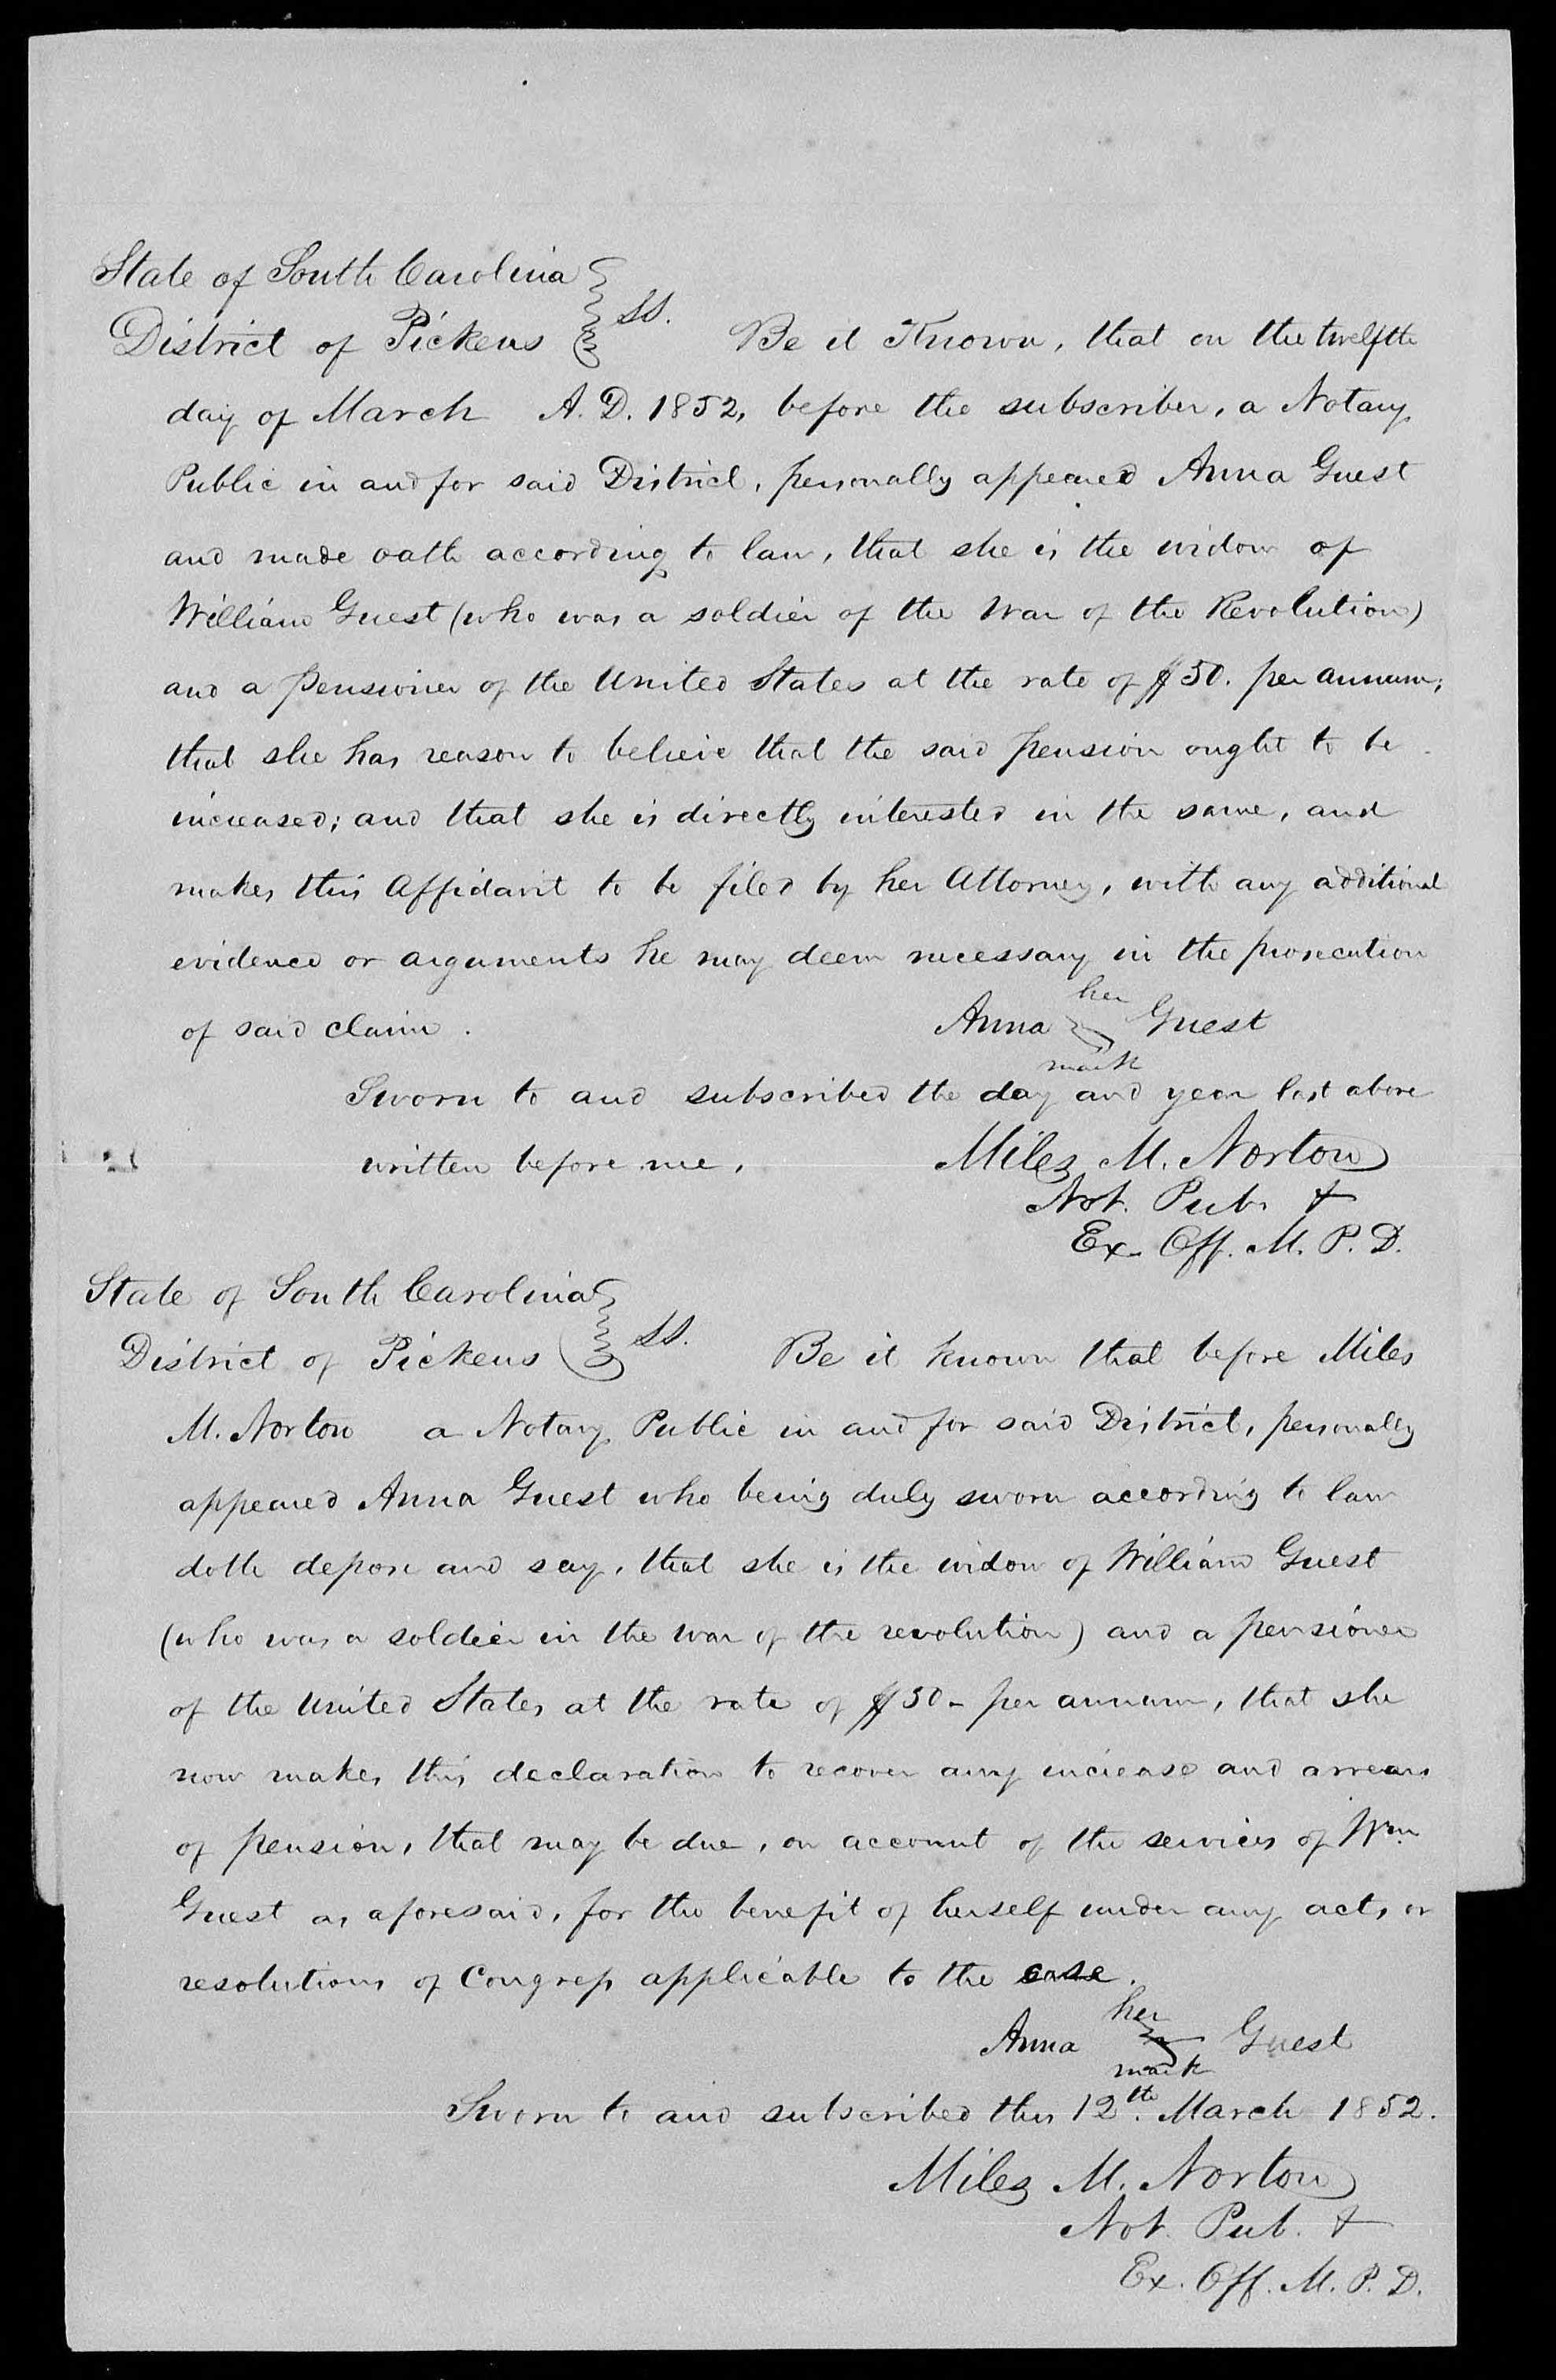 Request for Pension Reconsideration from Anne Guest, 12 March 1852